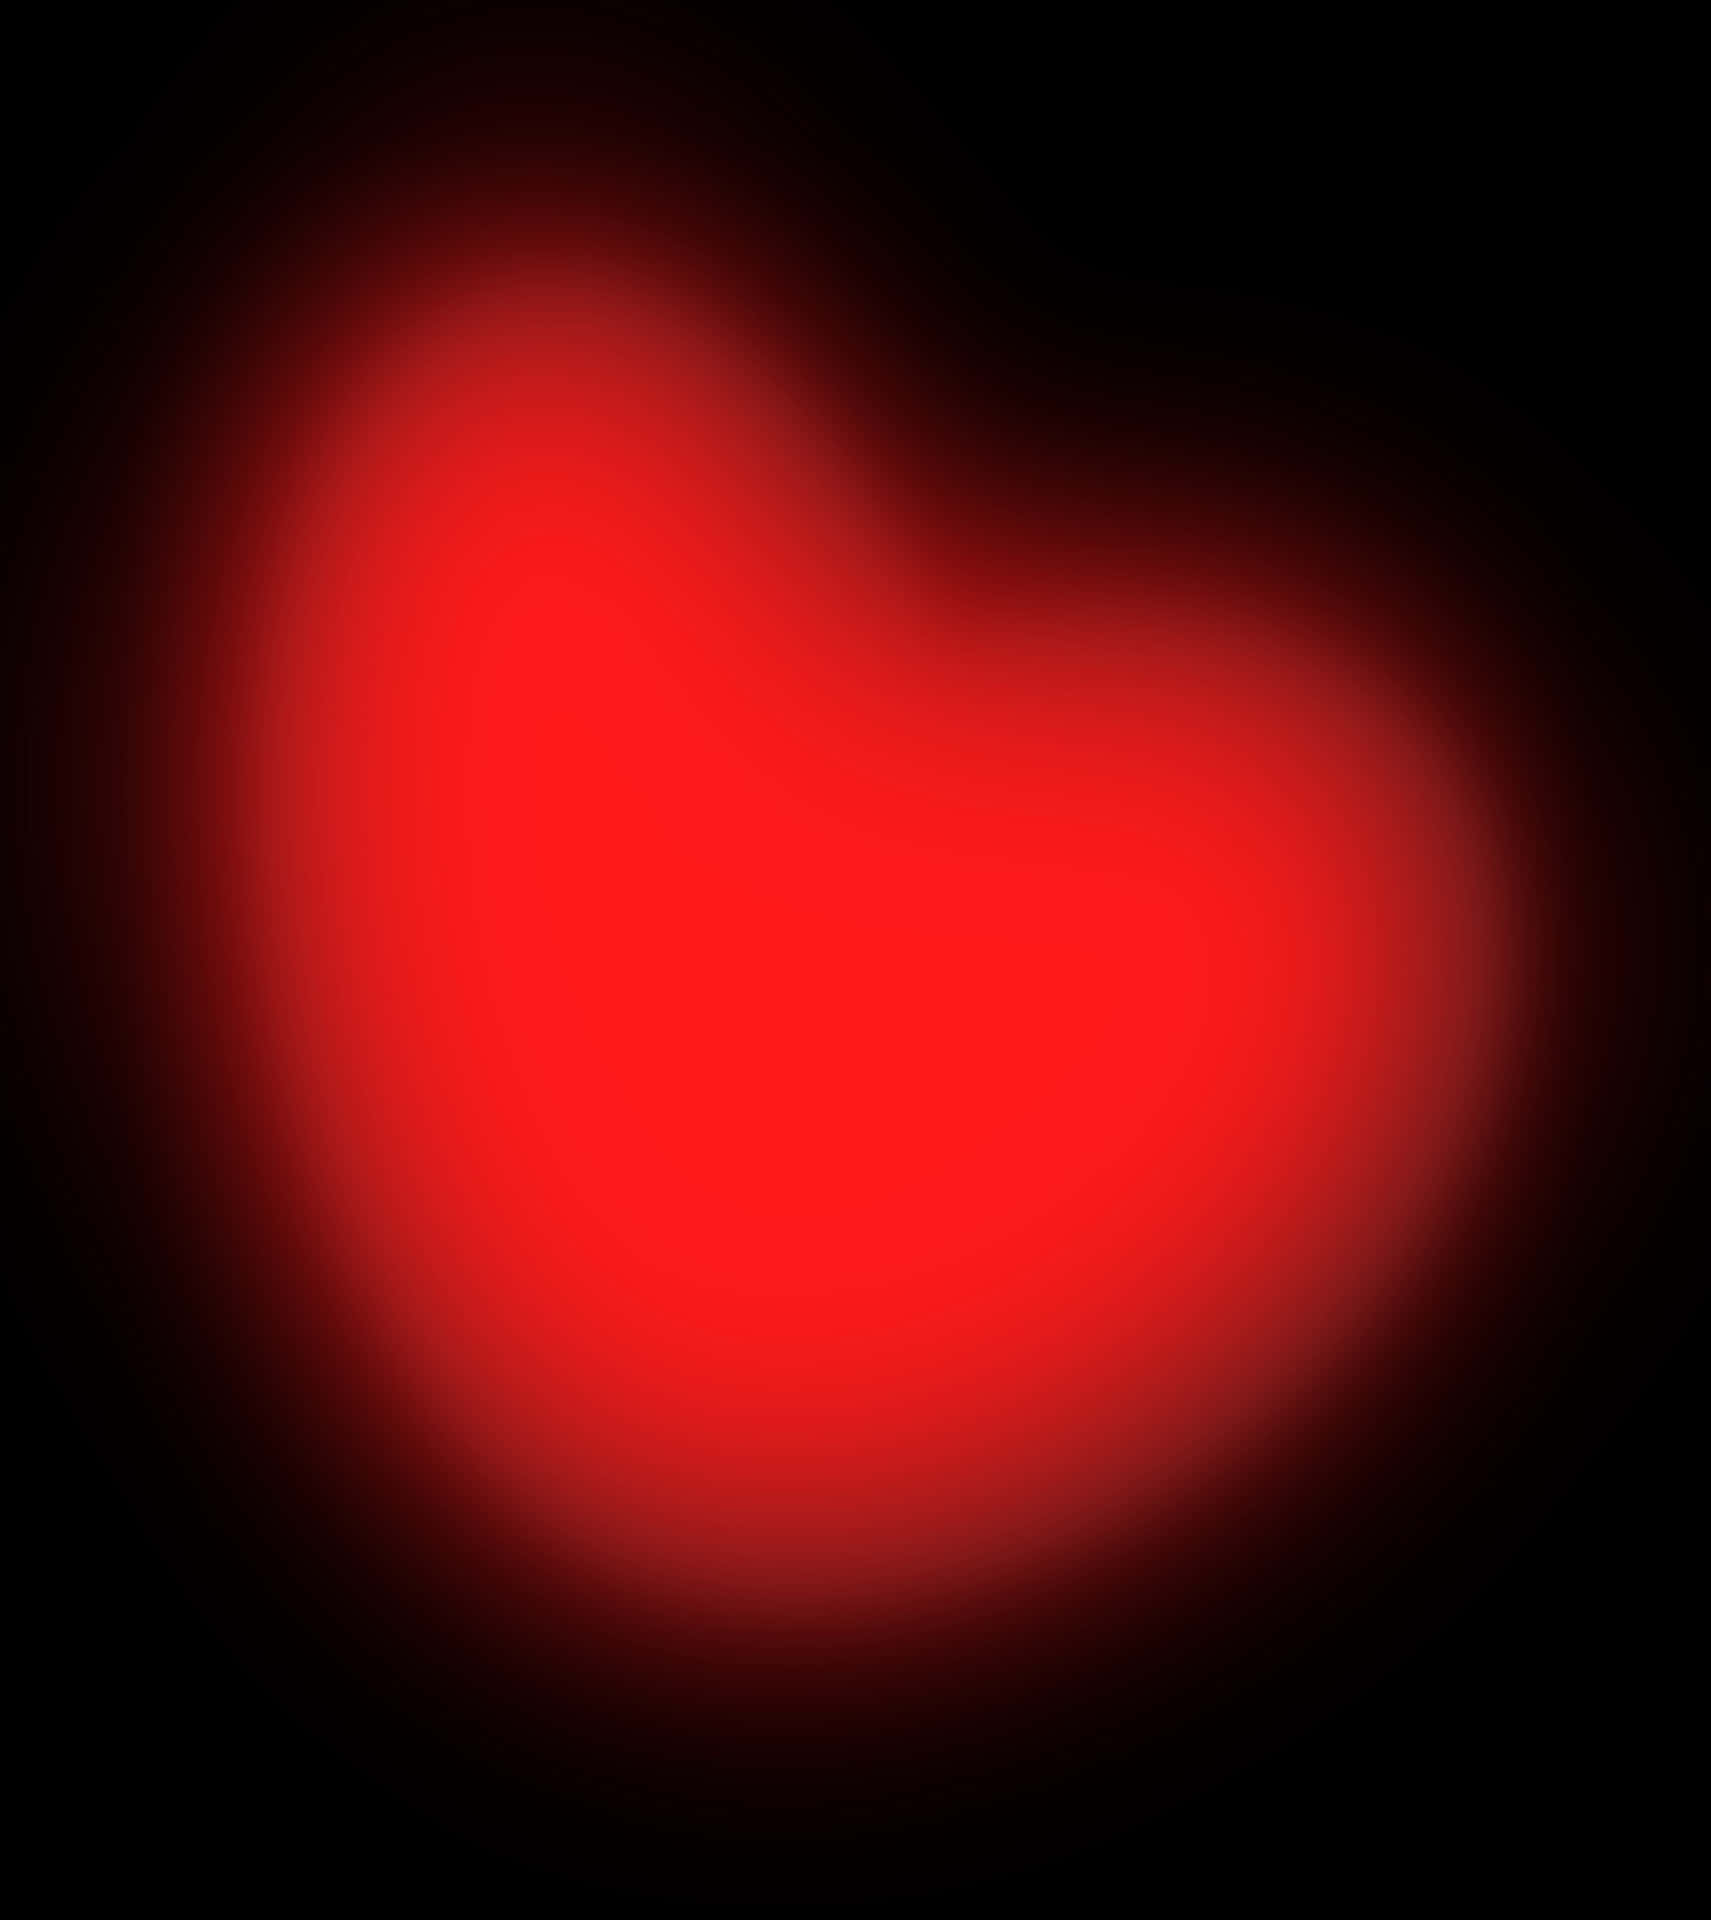 Abstract Blurry Red Heart Wallpaper